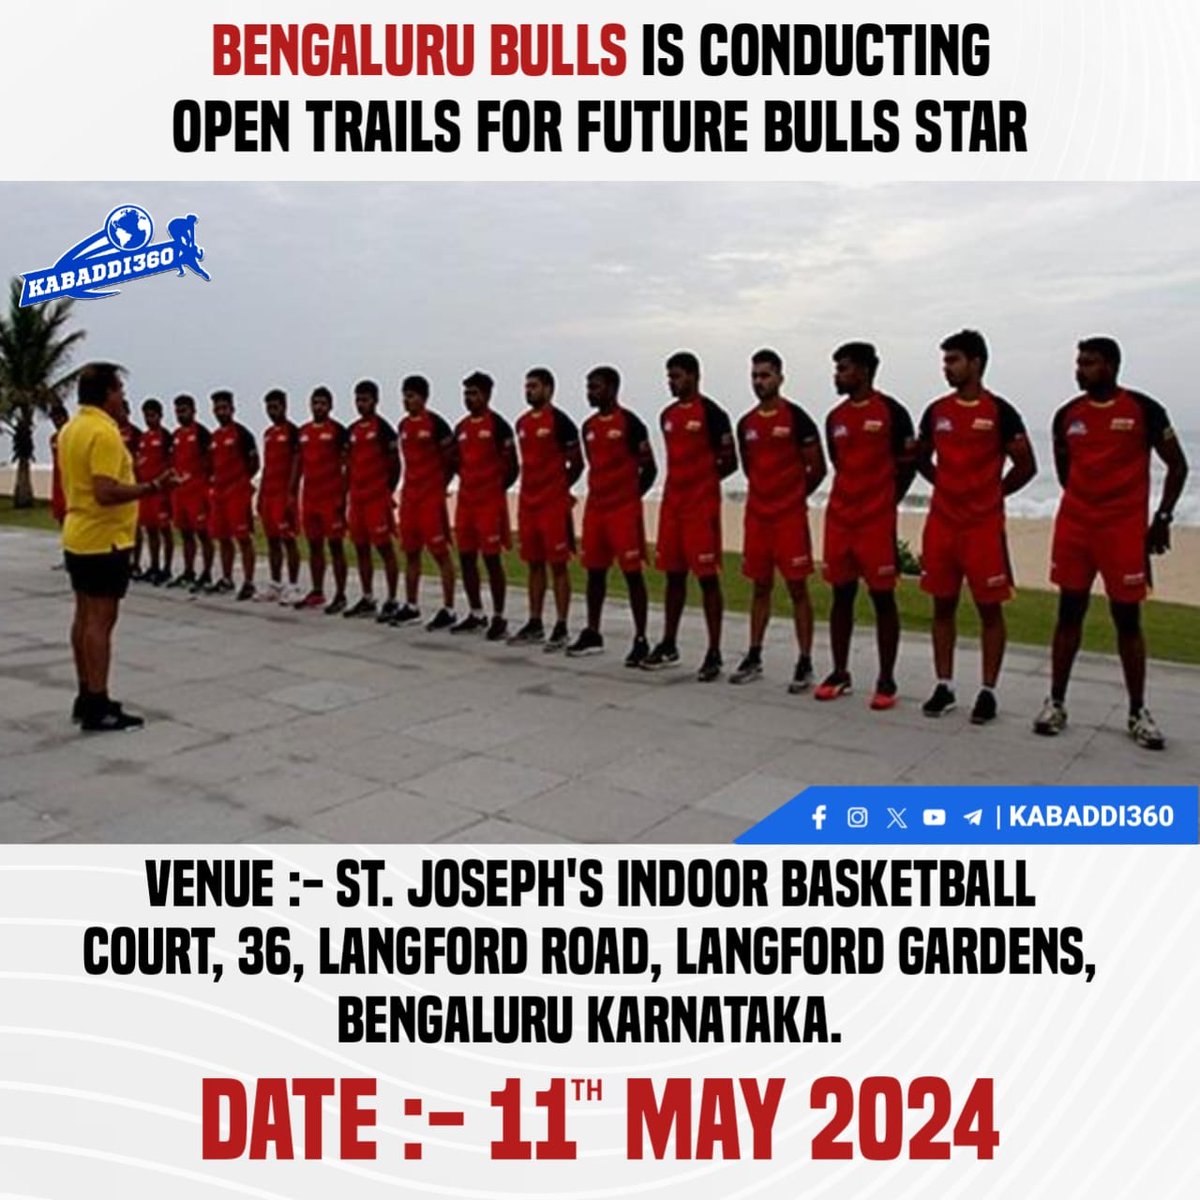 You will get more information about this on Bengaluru Bulls official Social Media handles
.
.
.
.
.
#BengaluruBulls
#prokabaddileague 
#Prokabaddi 
#Kabaddi360